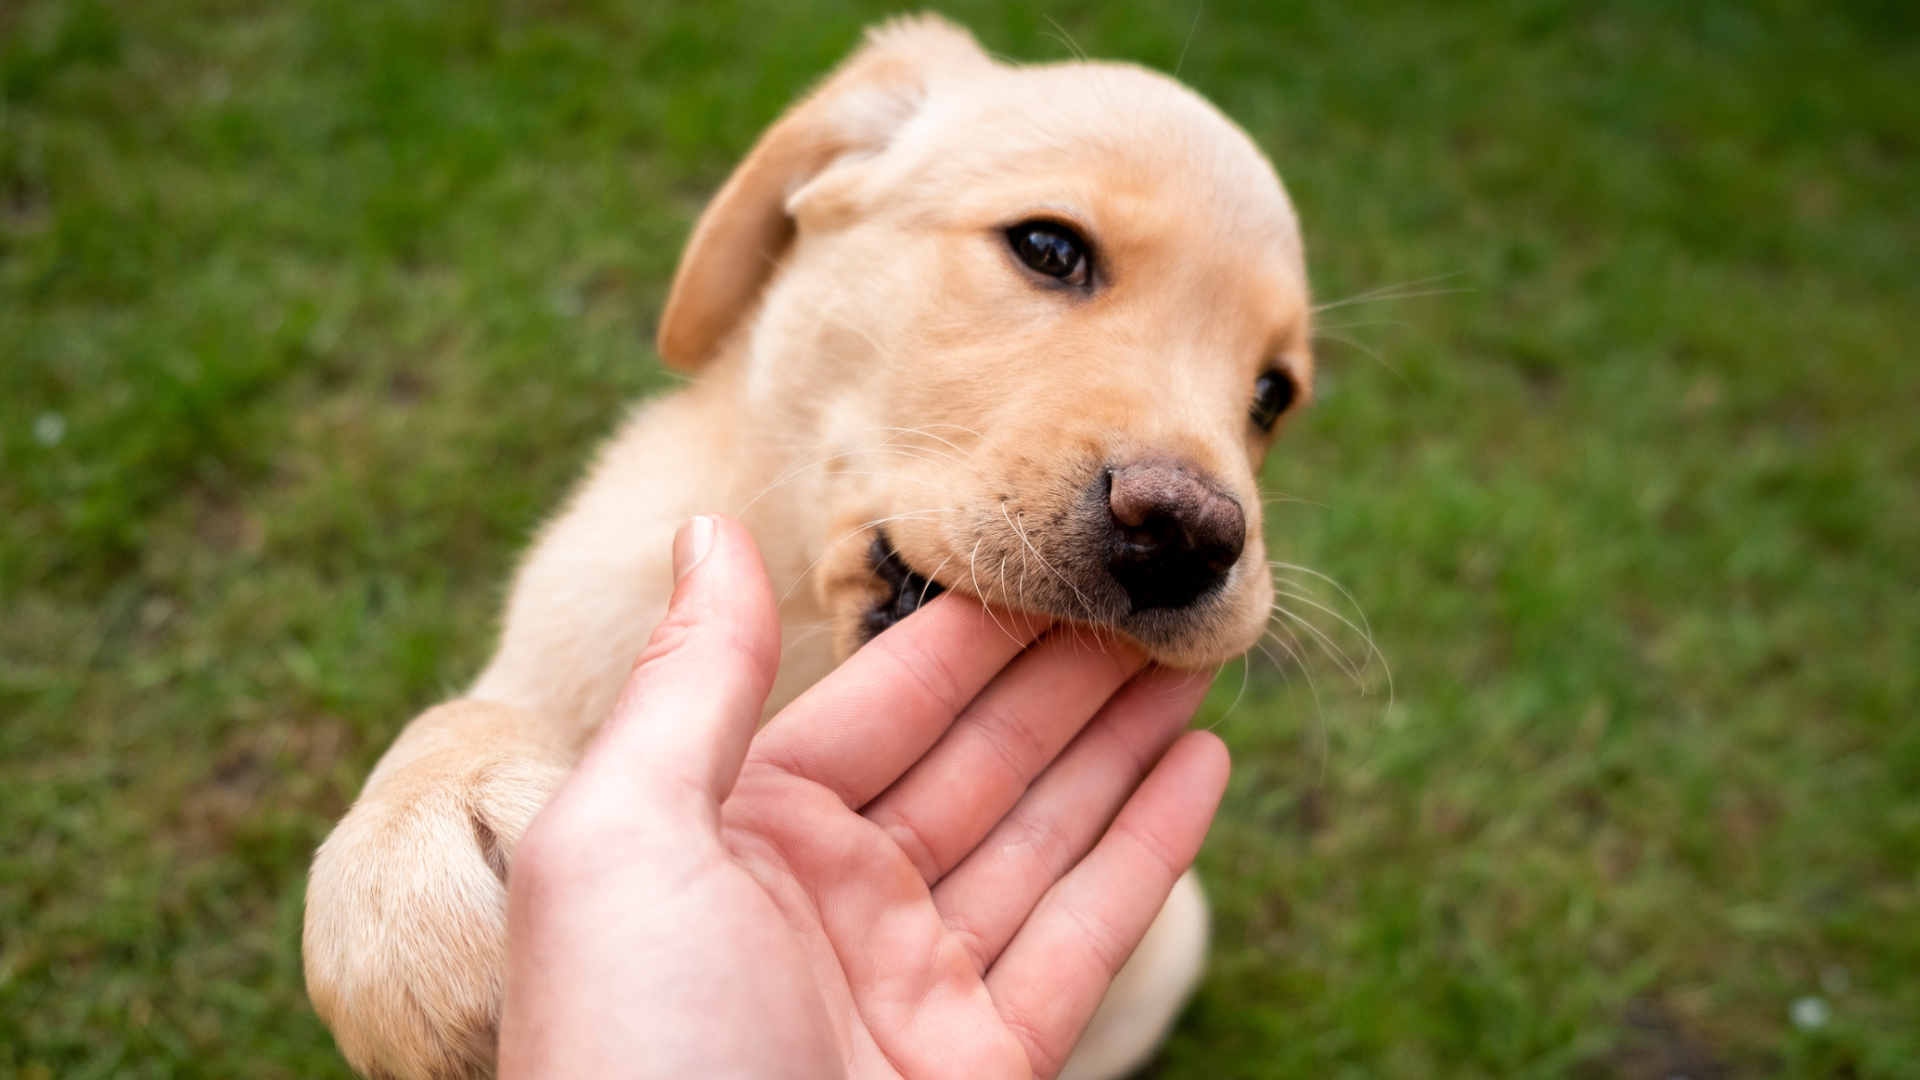 Why is my dog play biting me? An expert reveals the reason and how to stop this